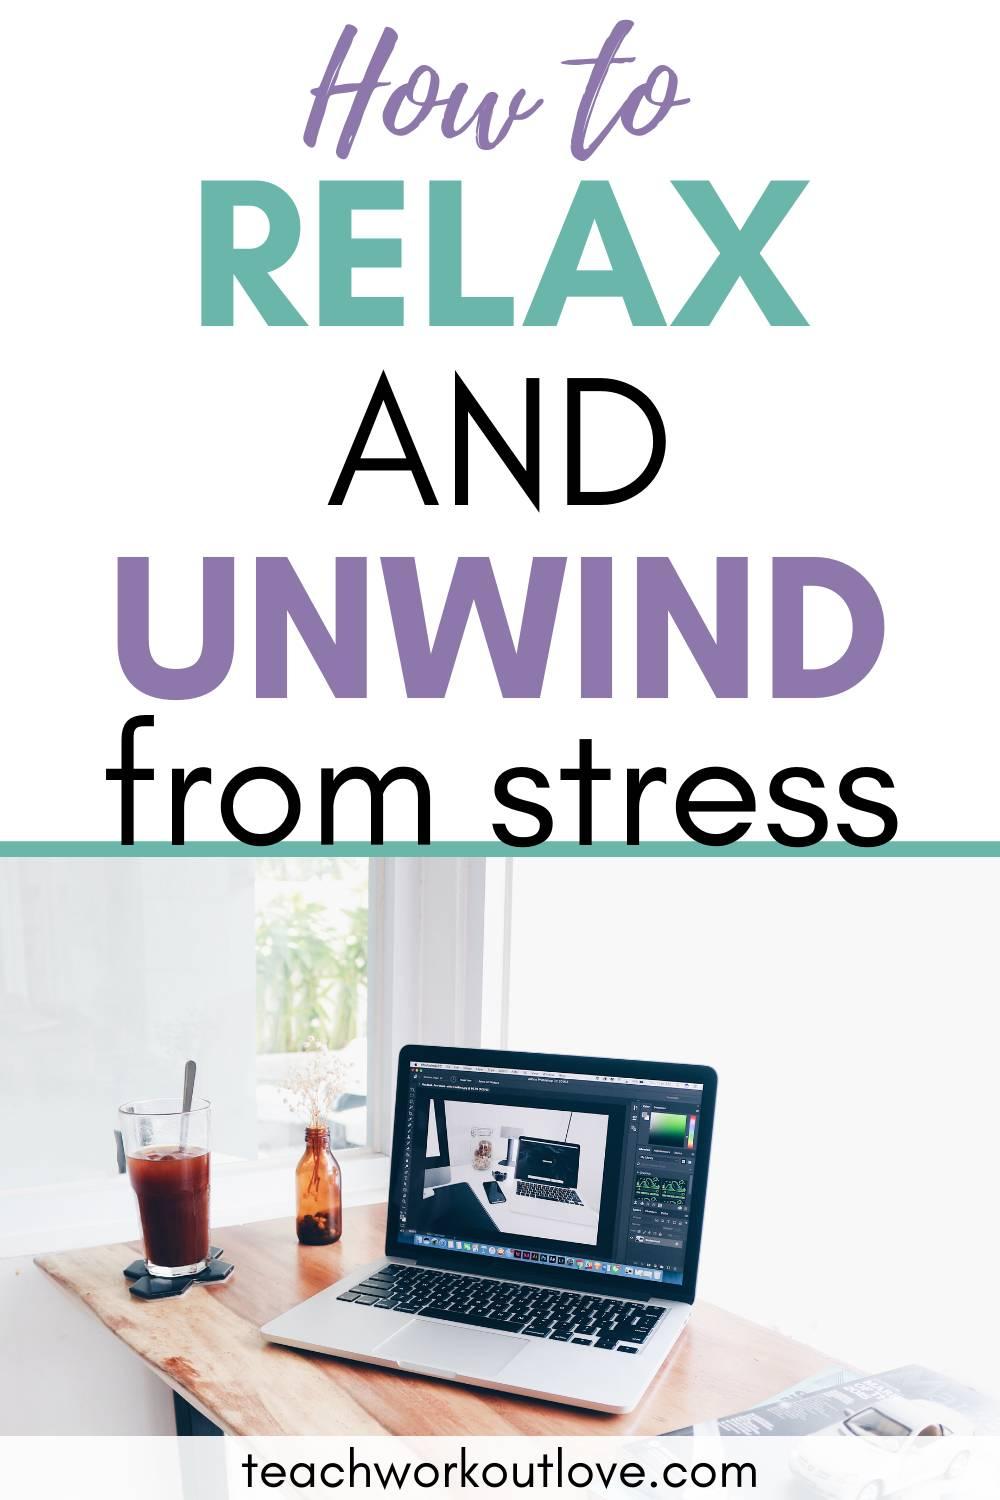 if you would like to find out more about how you can relax & unwind, read on to uncover the best tips & tricks to make the most of today!